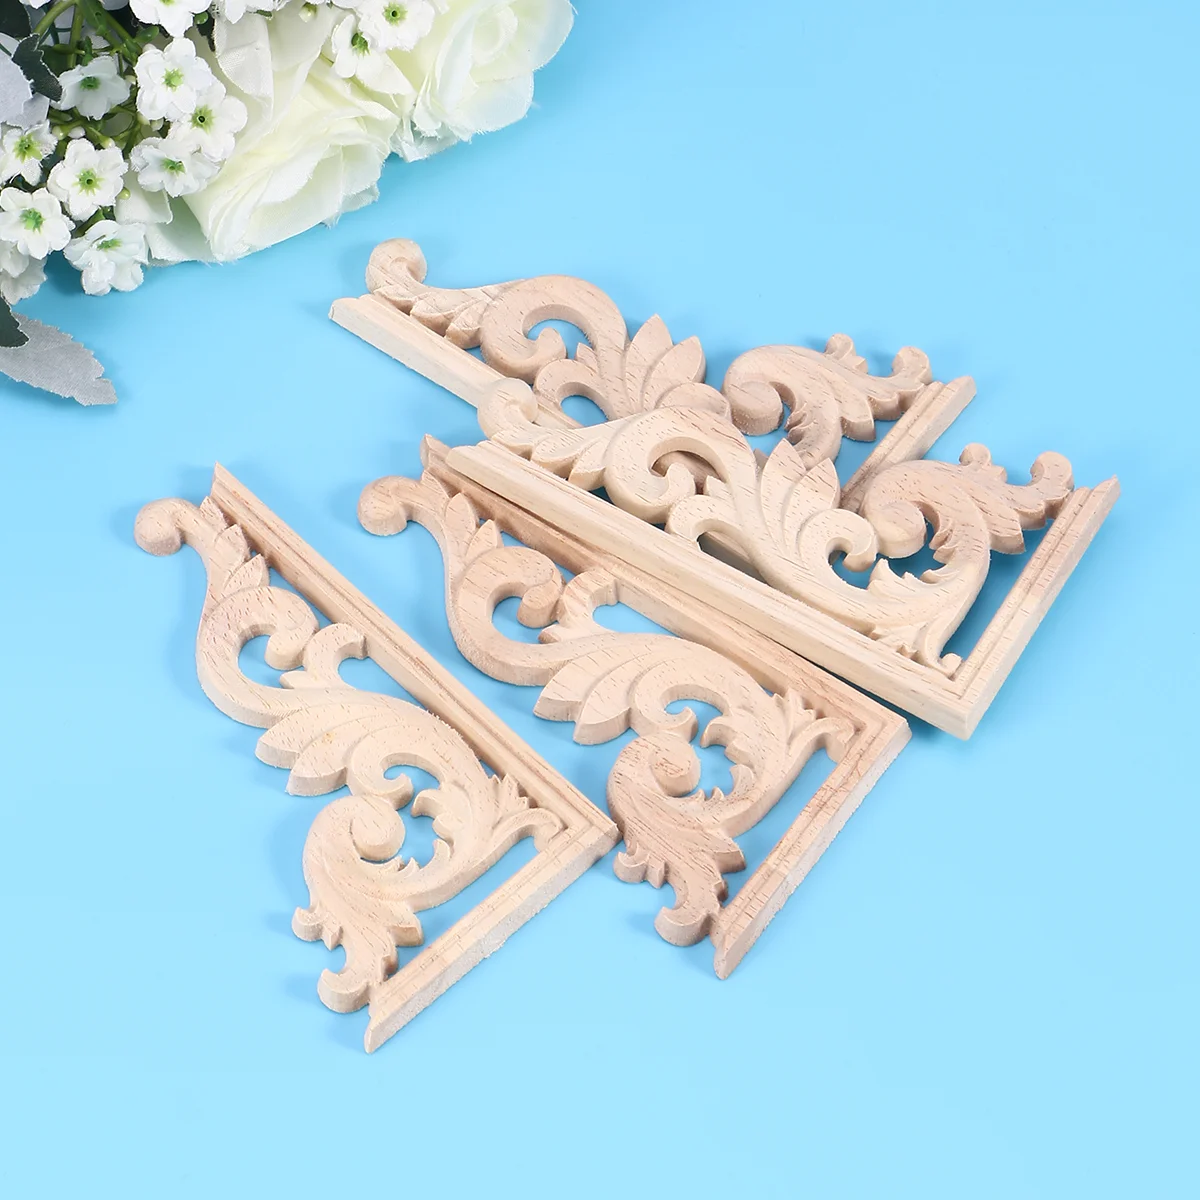 

Wood Applique Onlay Carved Appliques Onlays Furniture Corner Decorative Unpainted Wooden Cabinet Decal Wall Frame Frames Carving